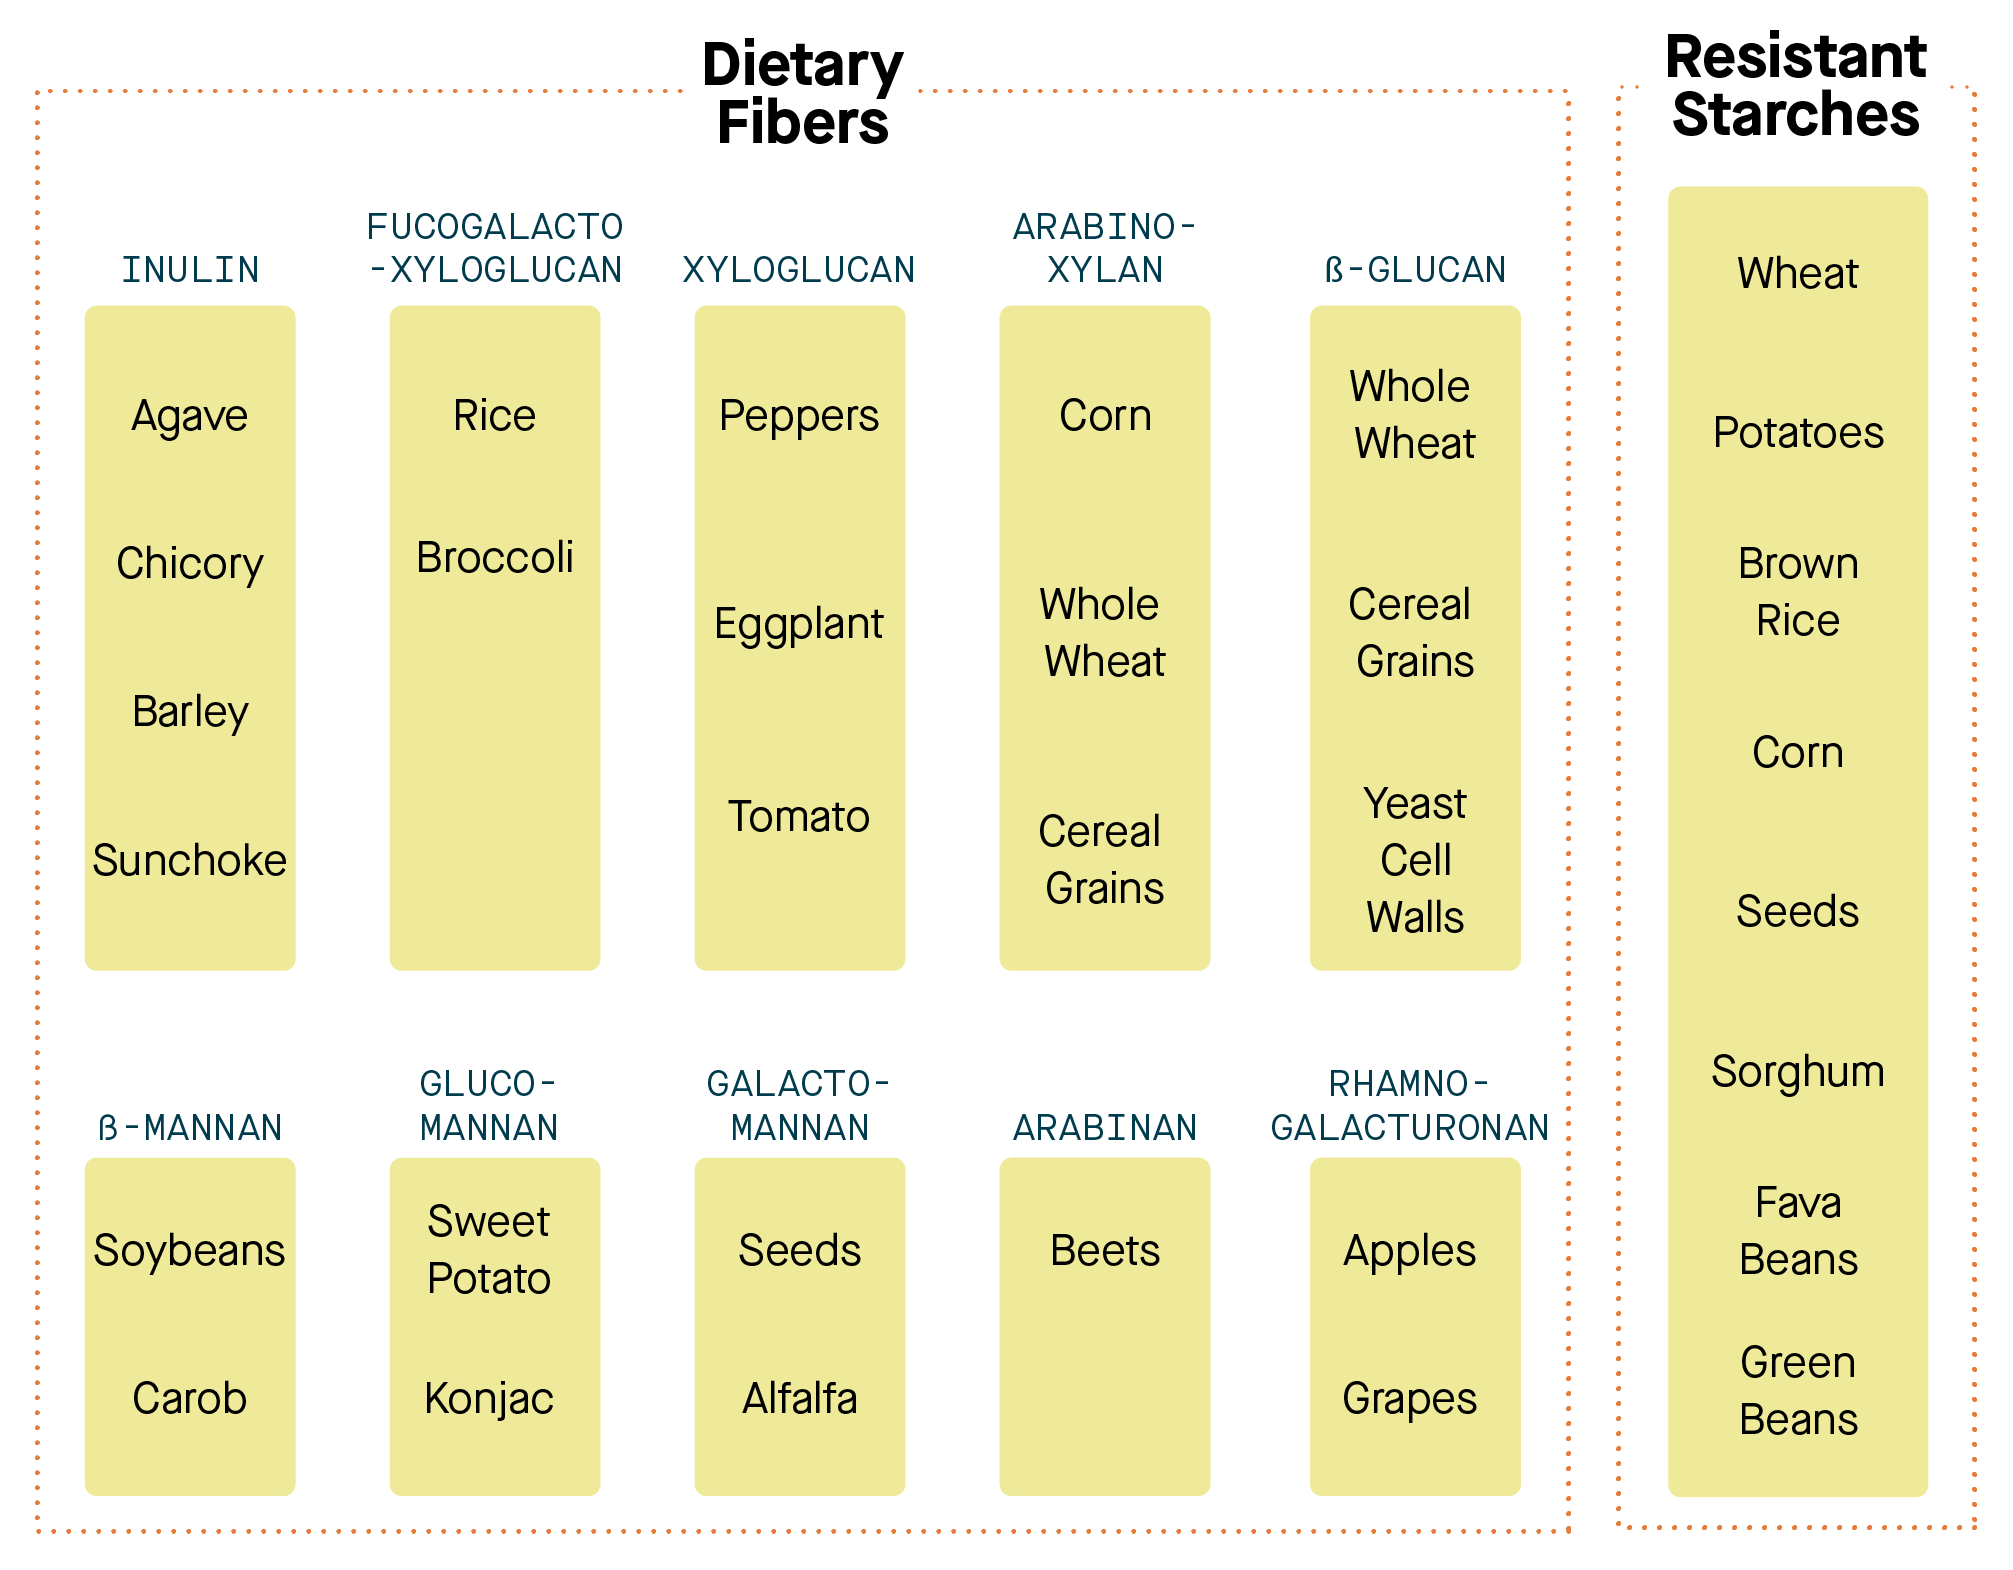 Sources of dietary fiber and resistant starch